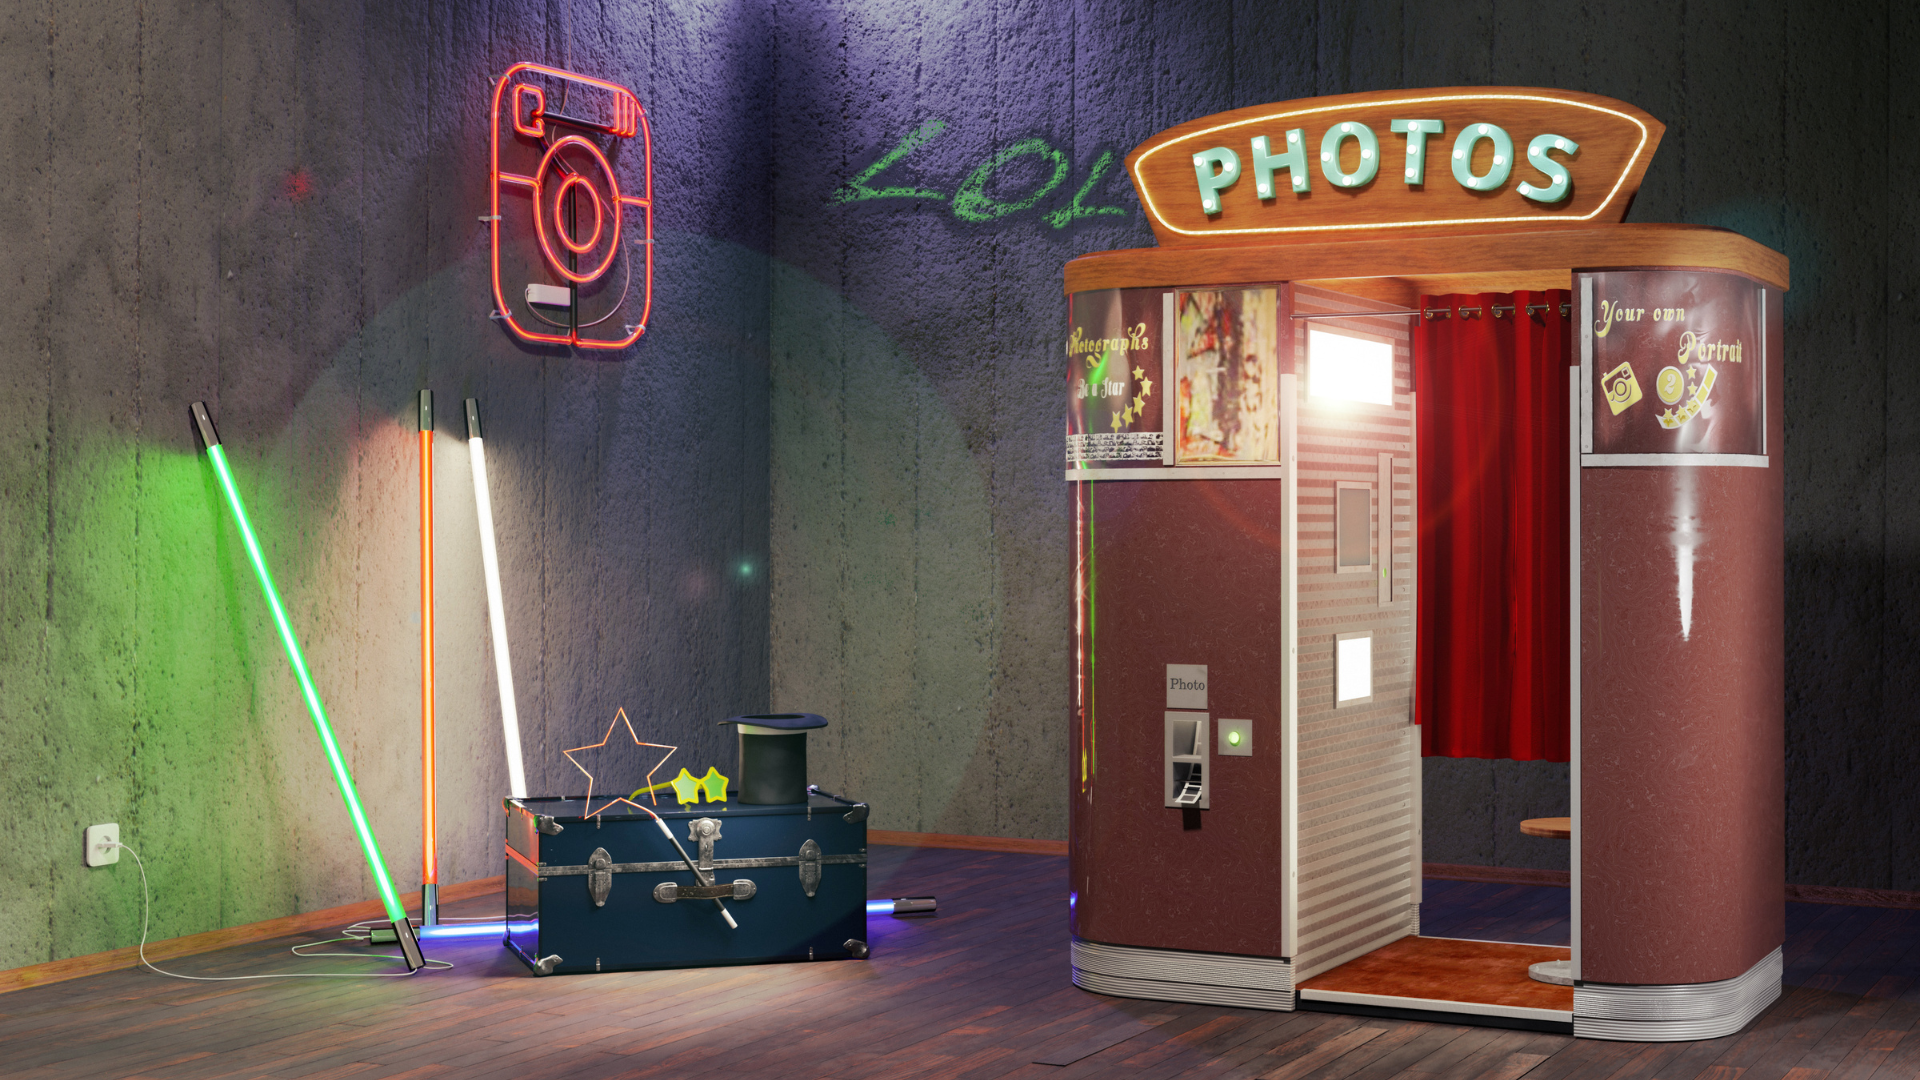 A room with a photo booth and a neon sign that says photos